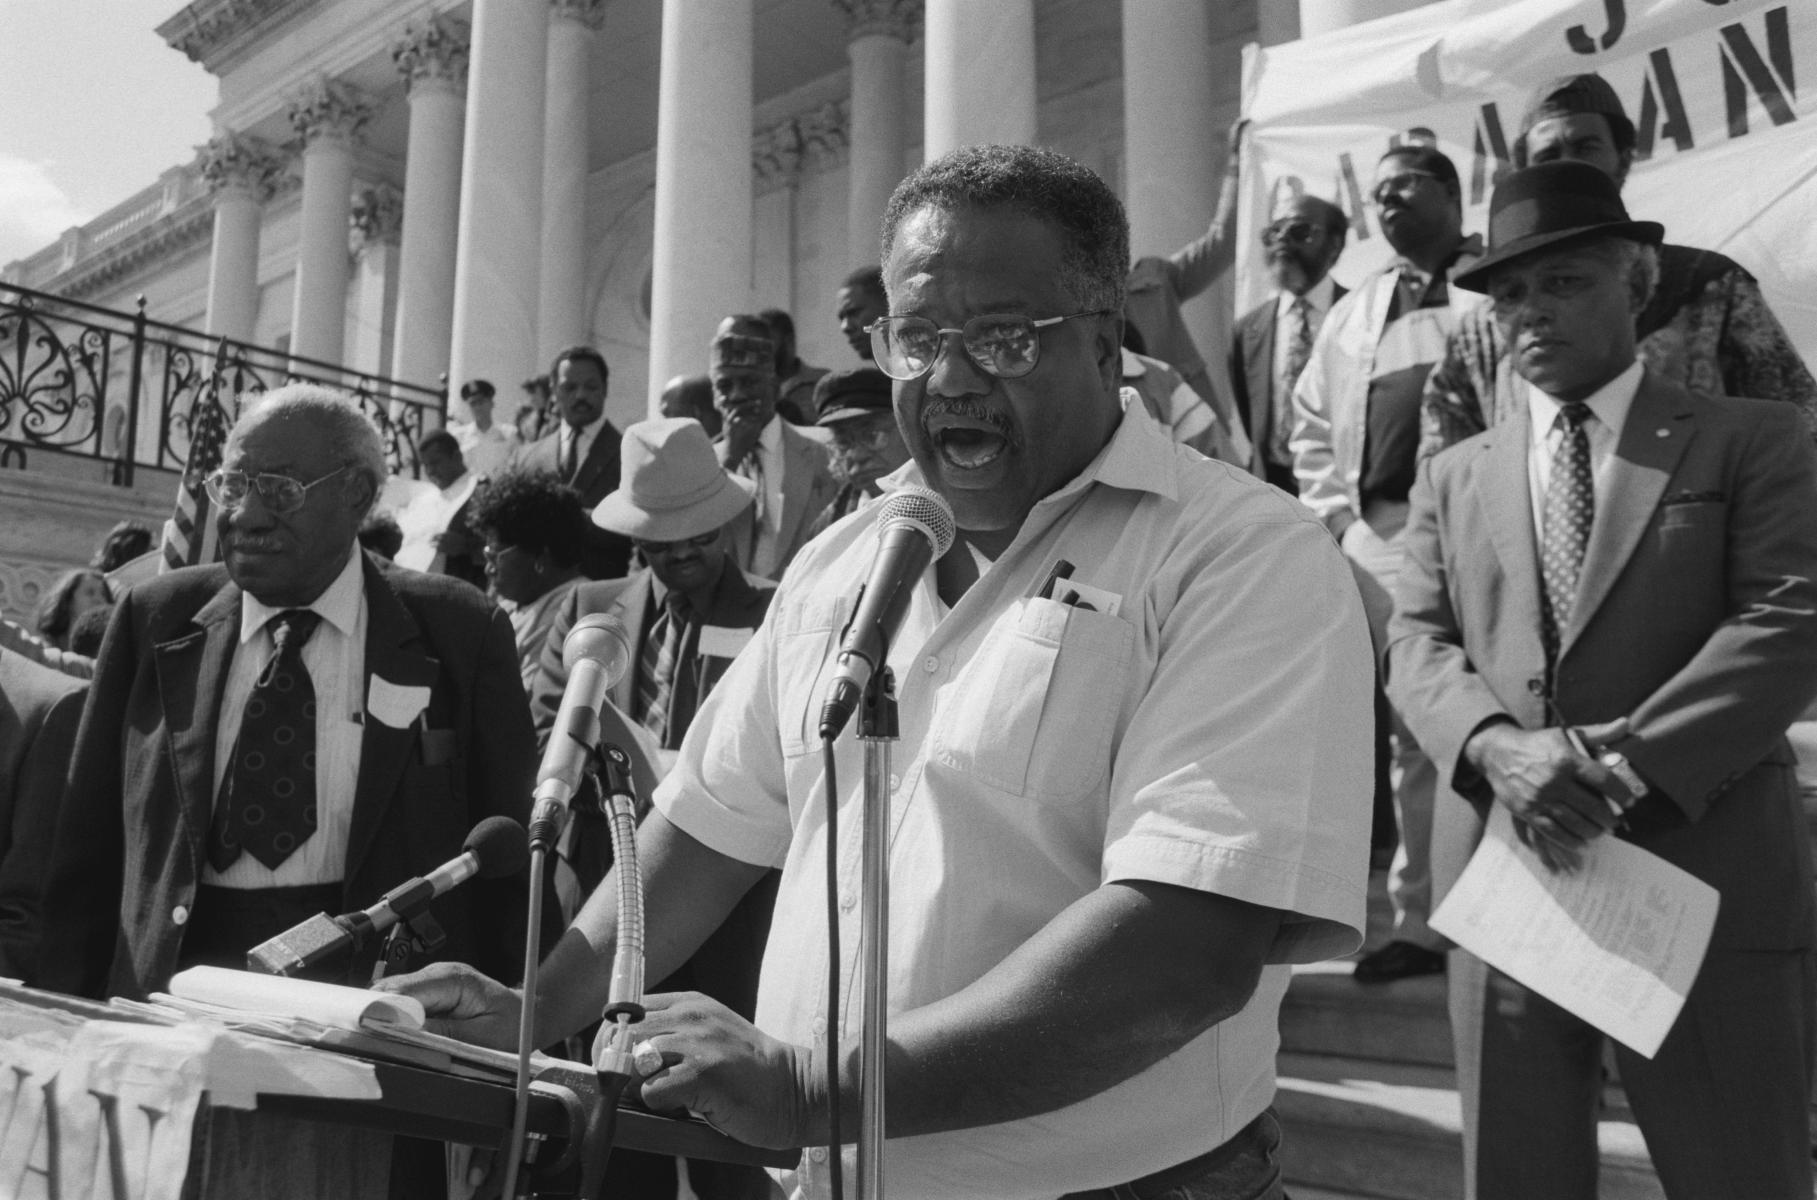 <p><center>Washington, D.C.:</center></p>
Ralph Paige, executive director of the Federation of Southern Cooperatives Land Assistance Fund, speaks on the U.S. Capital steps during the " Caravan to DC Rally." : Images : AMERICAN BLACK FARMERS PROJECT - John Ficara